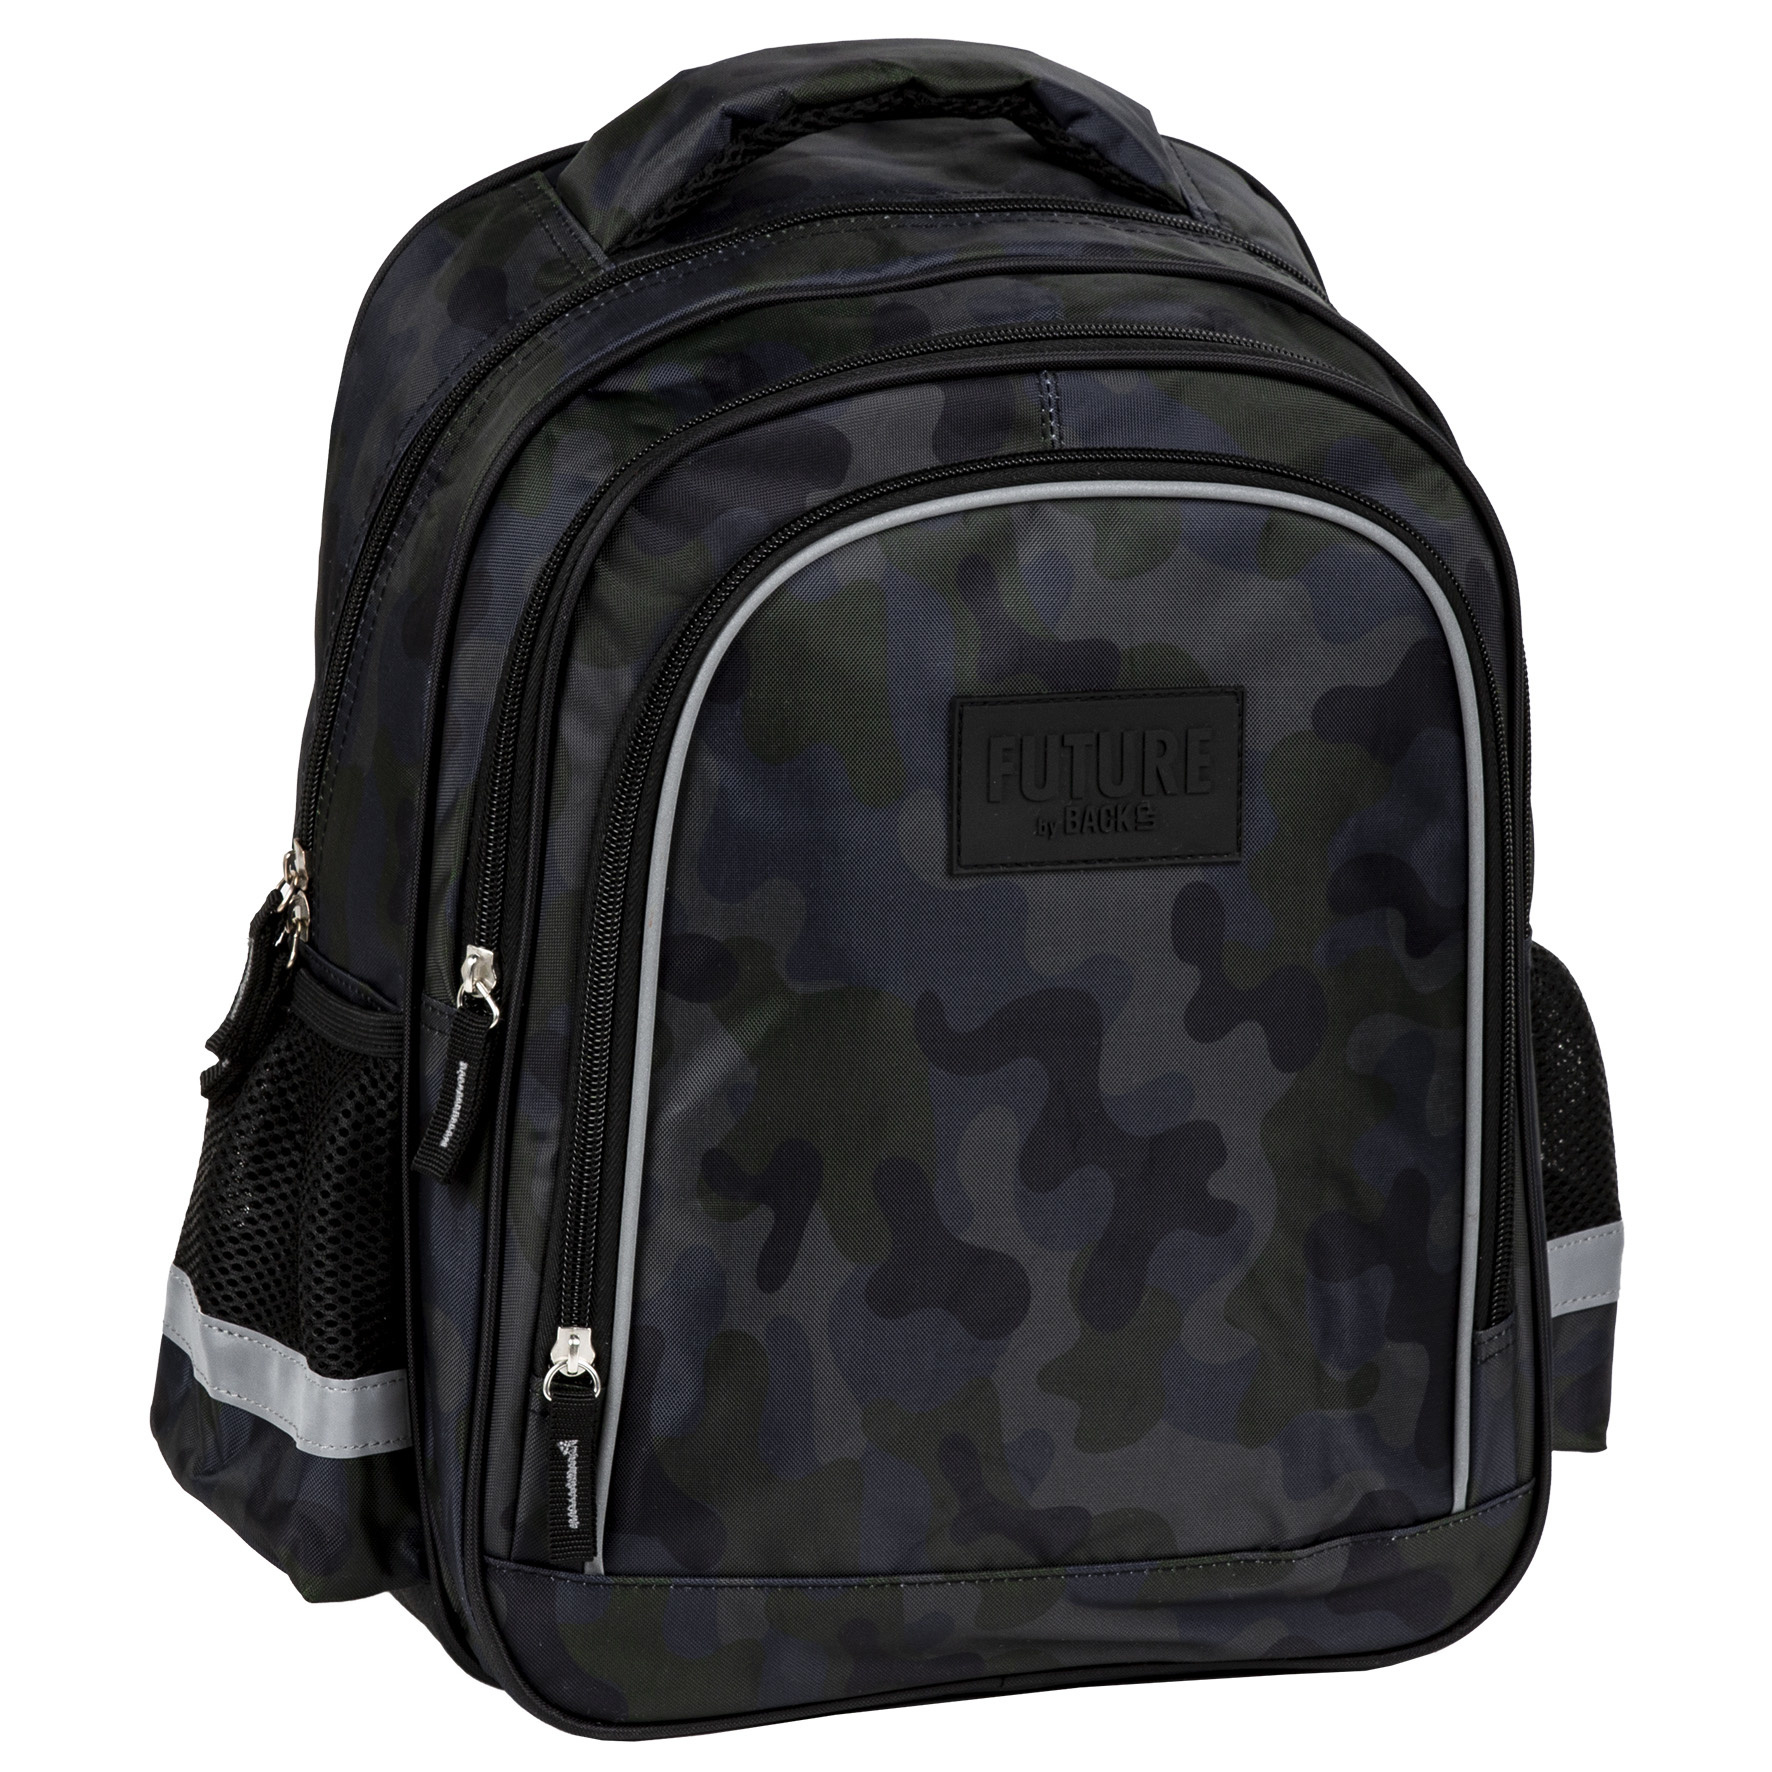 Camouflage Backpack - 38 x 28 x 16 cm - Multi